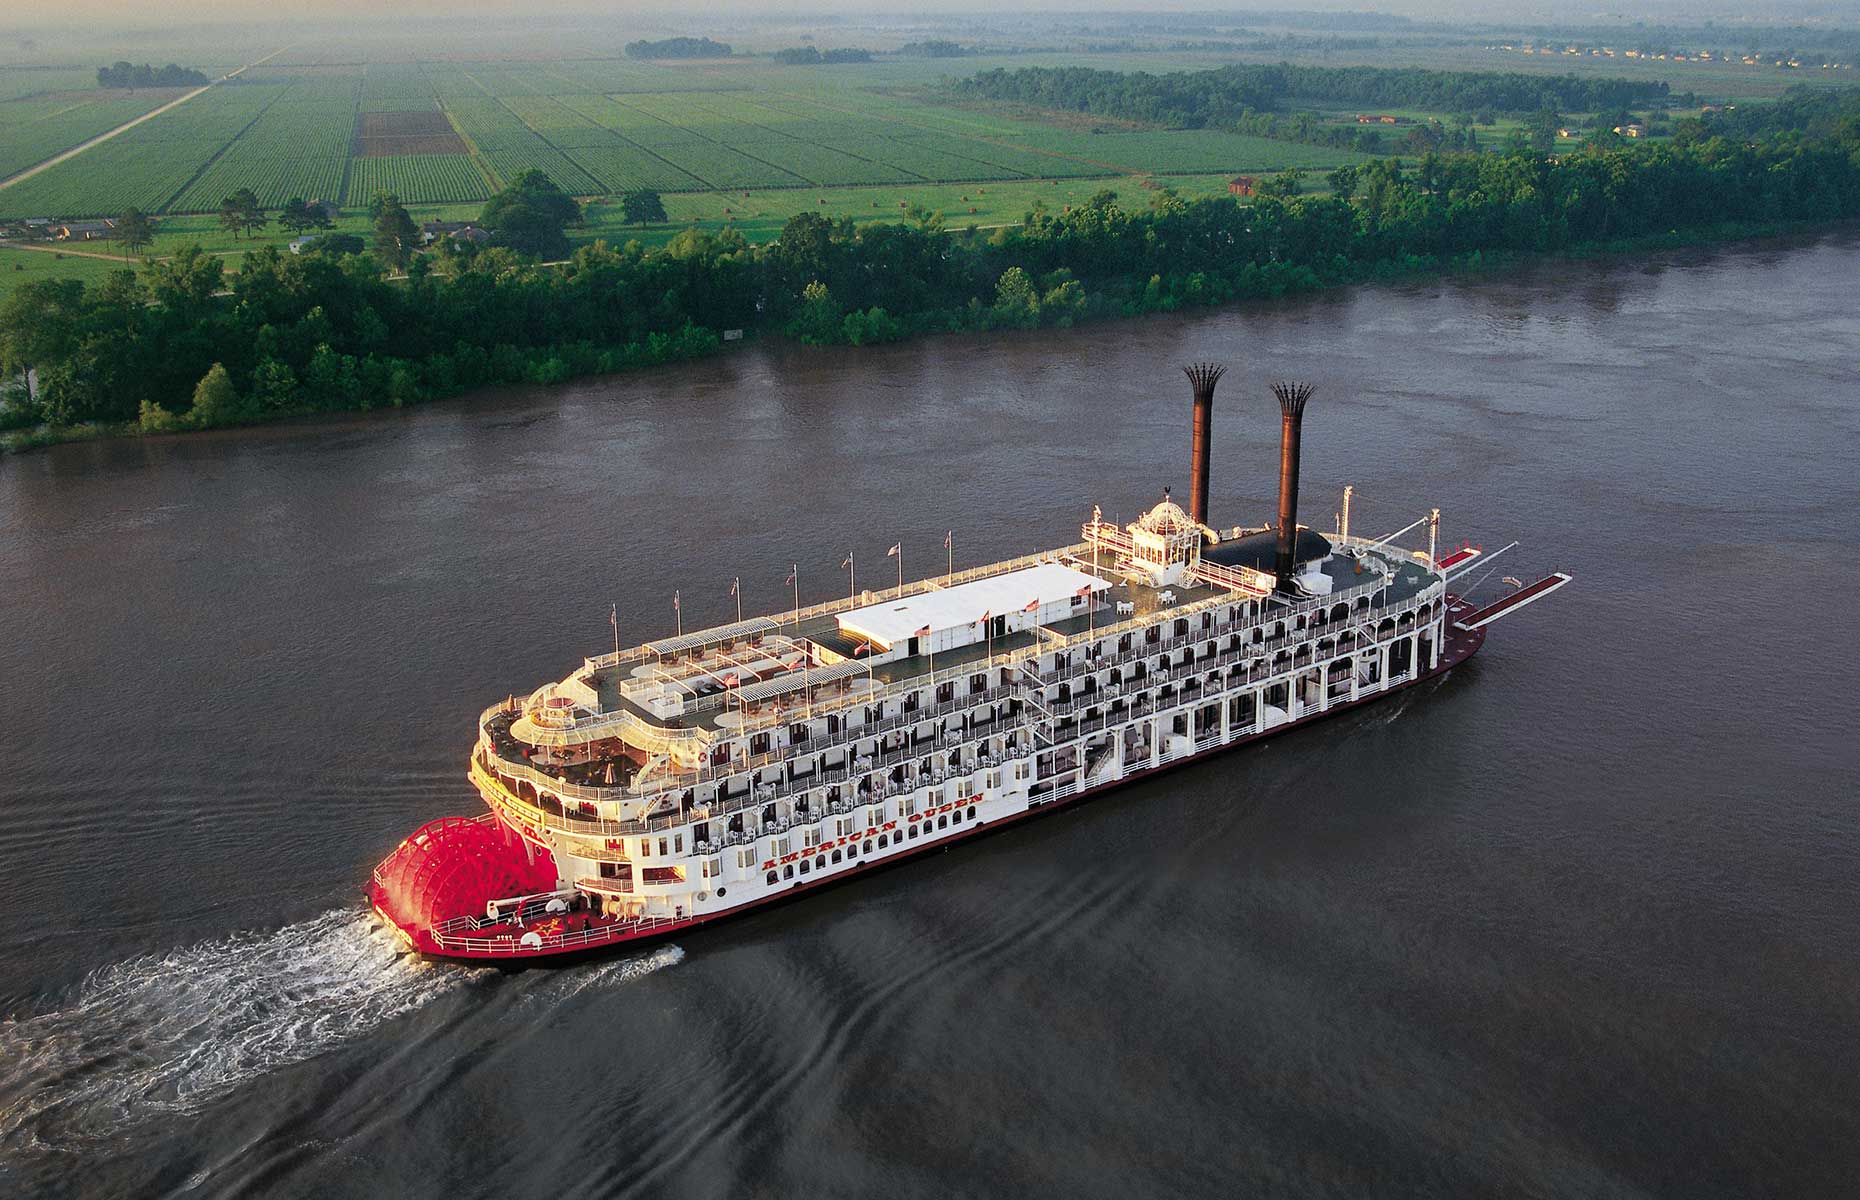 The American Queen Steaming 'Through America's Heartland' (Image: Courtesy of the American Queen Steamboat Company)